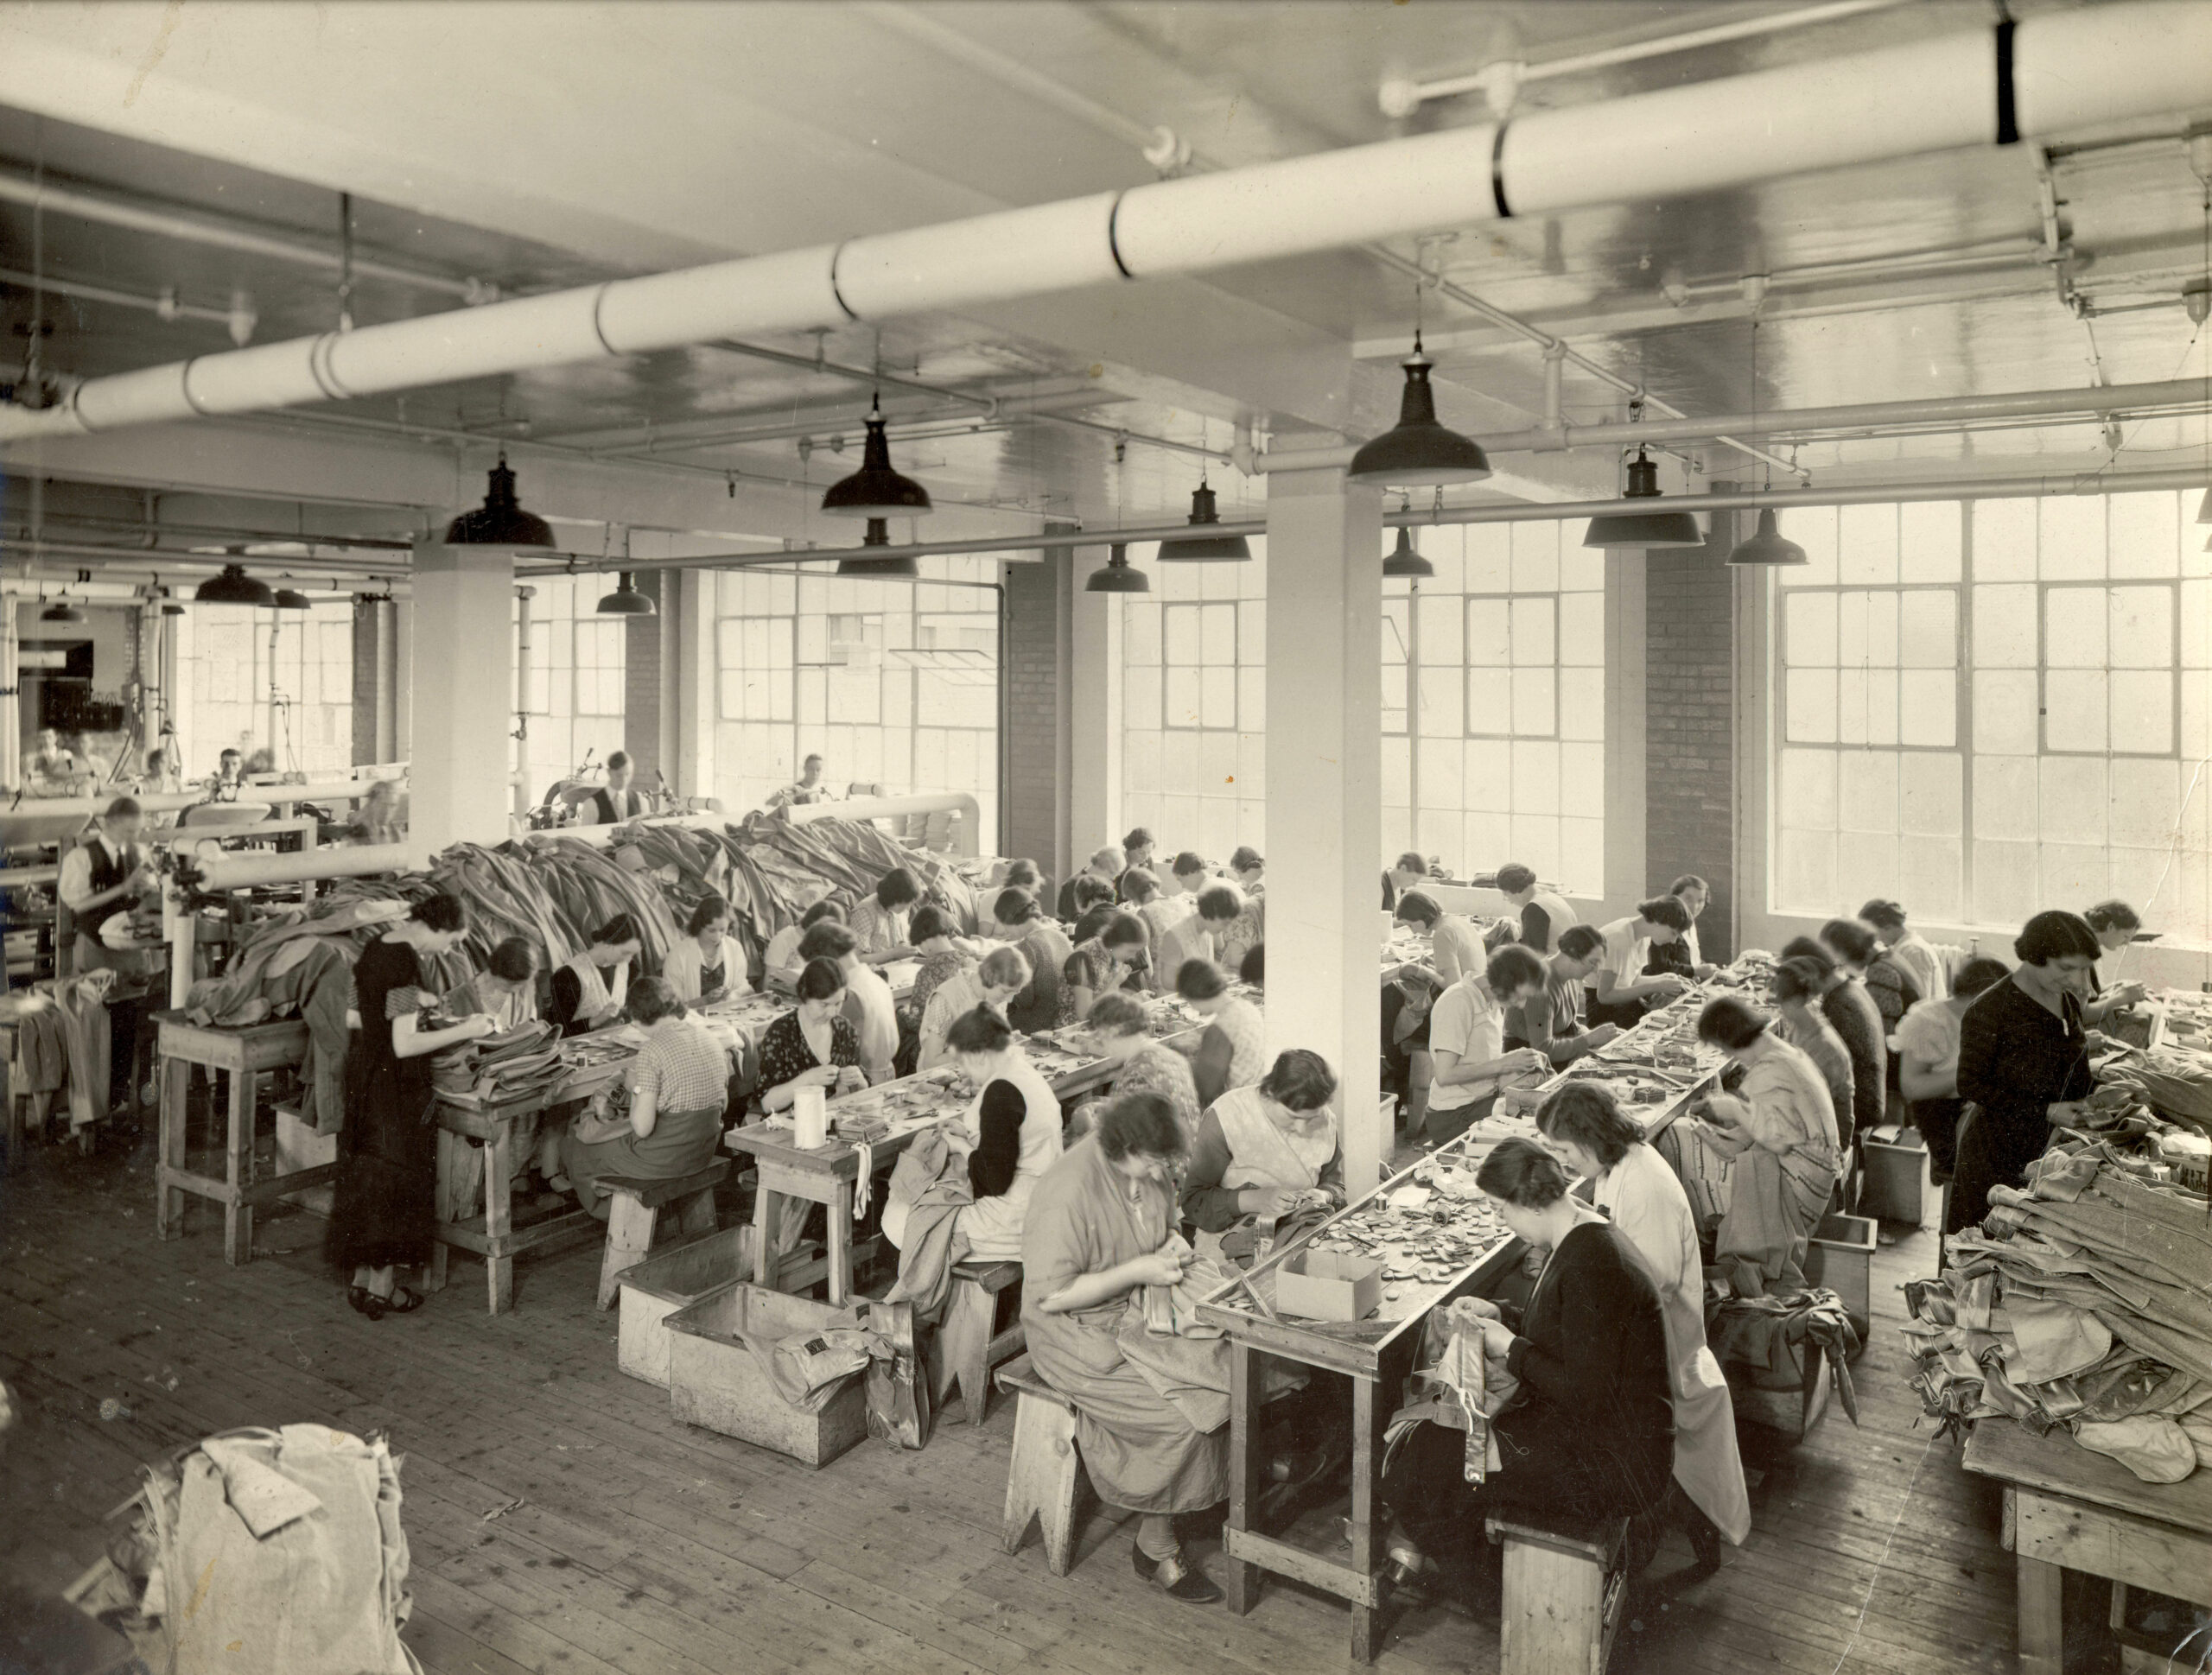 Sepia image of all-female workforce at the Simpsons Clothing Factory. The women are sitting down at long wooden benches, facing one another and working on garments.